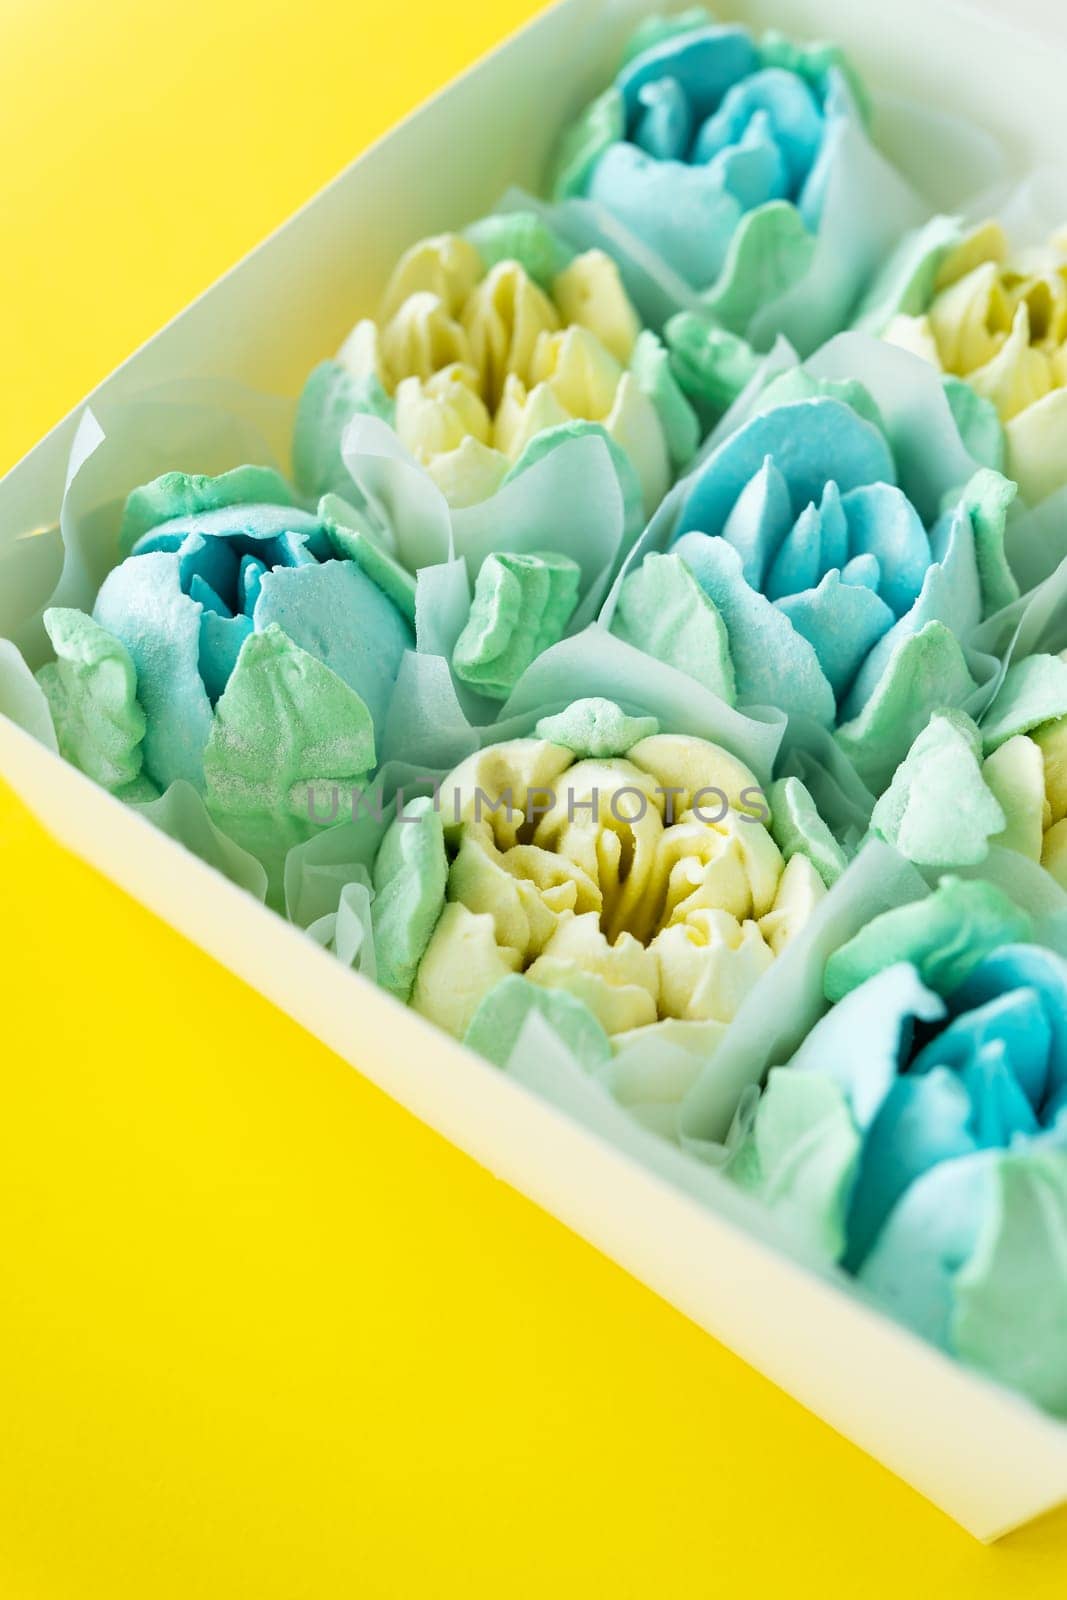 Box of colorful desserts in the shape of flowers on a two-color background. Marshmallow in the form of a rose